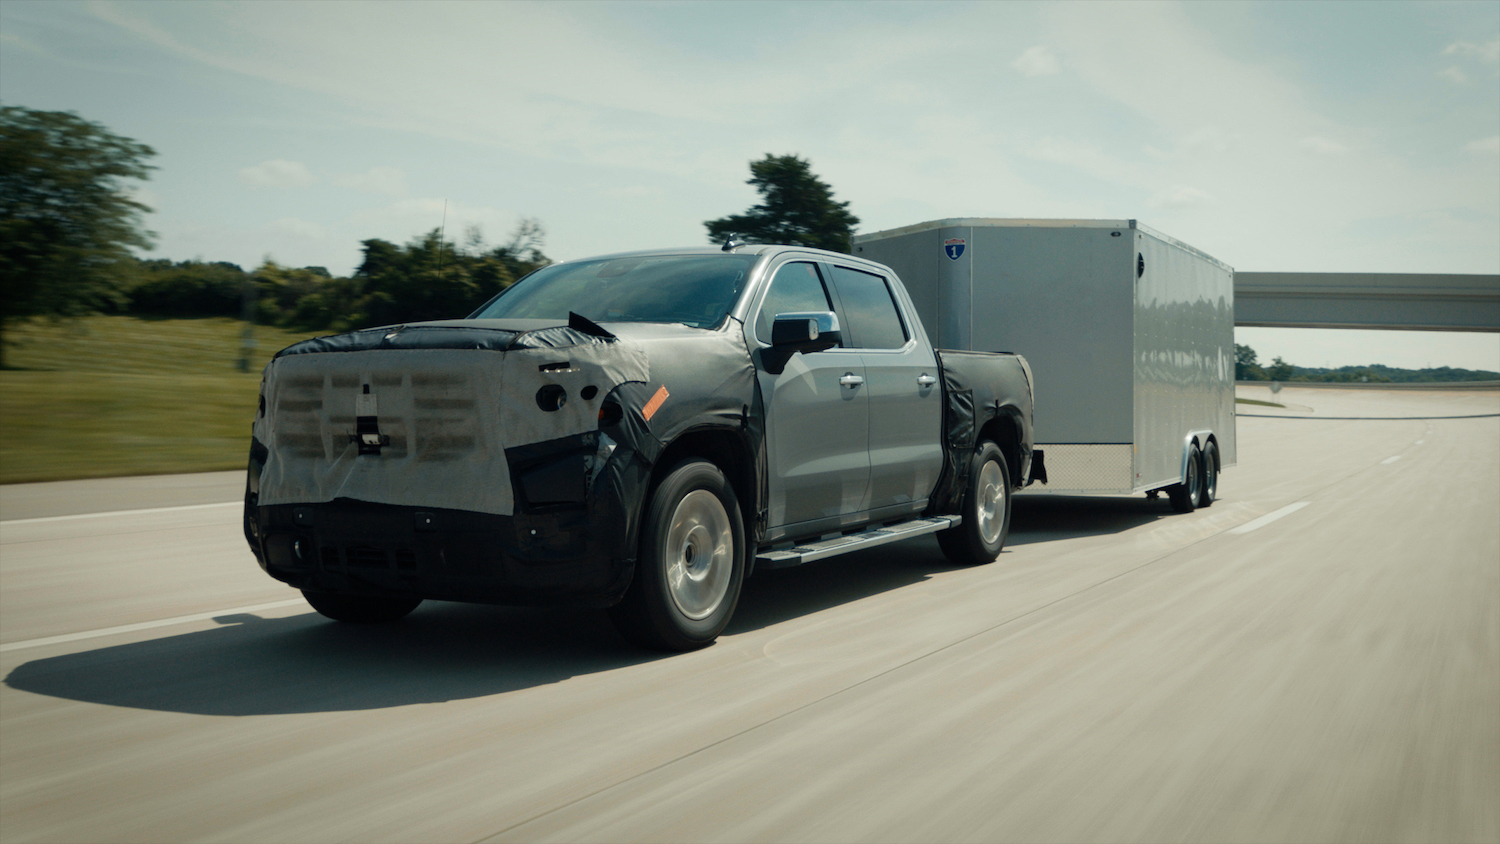 Gray, self-driving truck towing a trailer without the driver's input.